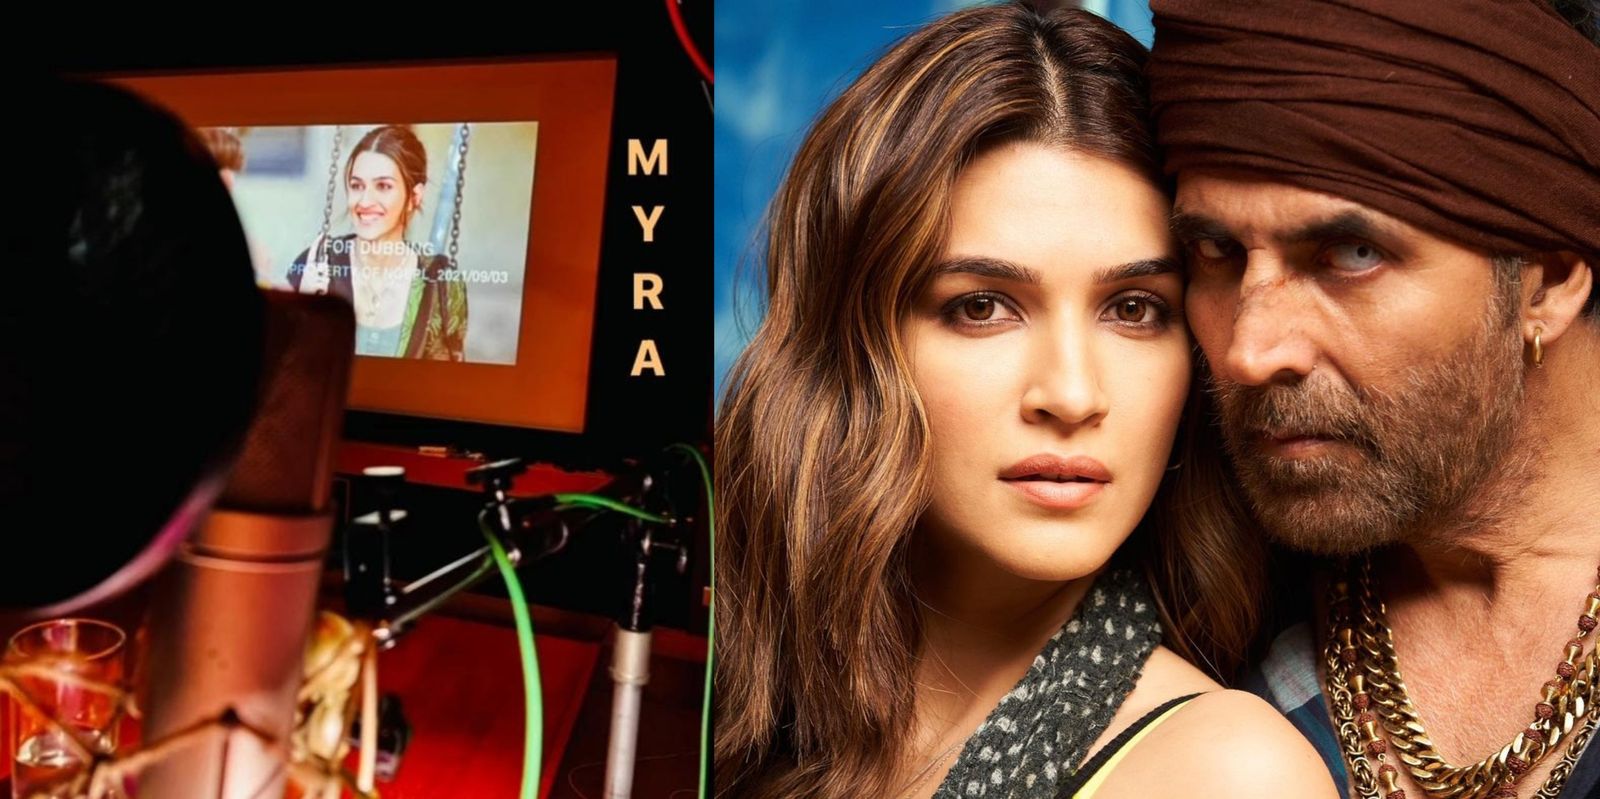 Bachchan Pandey: Kriti Sanon shares glimpse of her character Myra during dubbing sessions